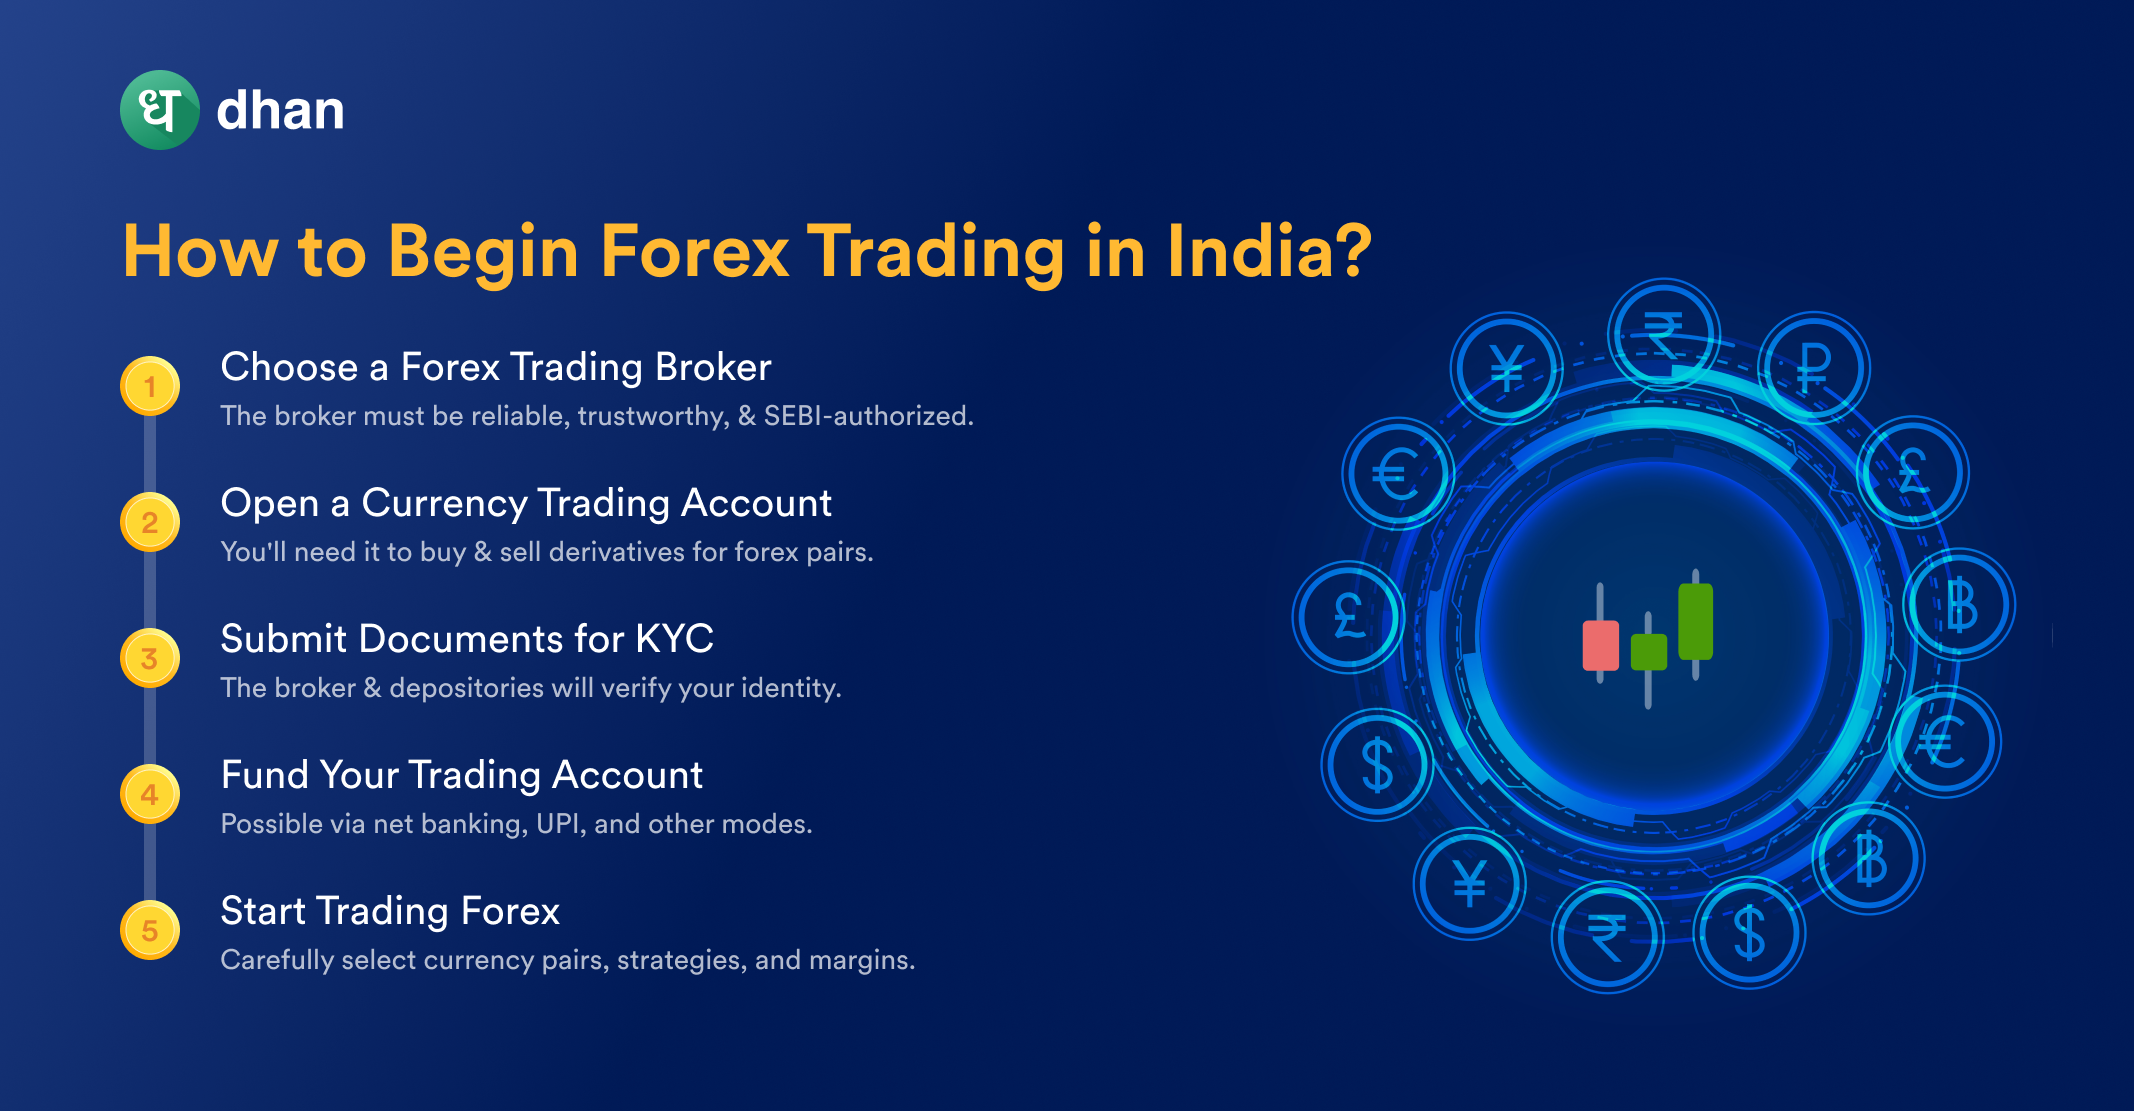 Steps to begin forex trading